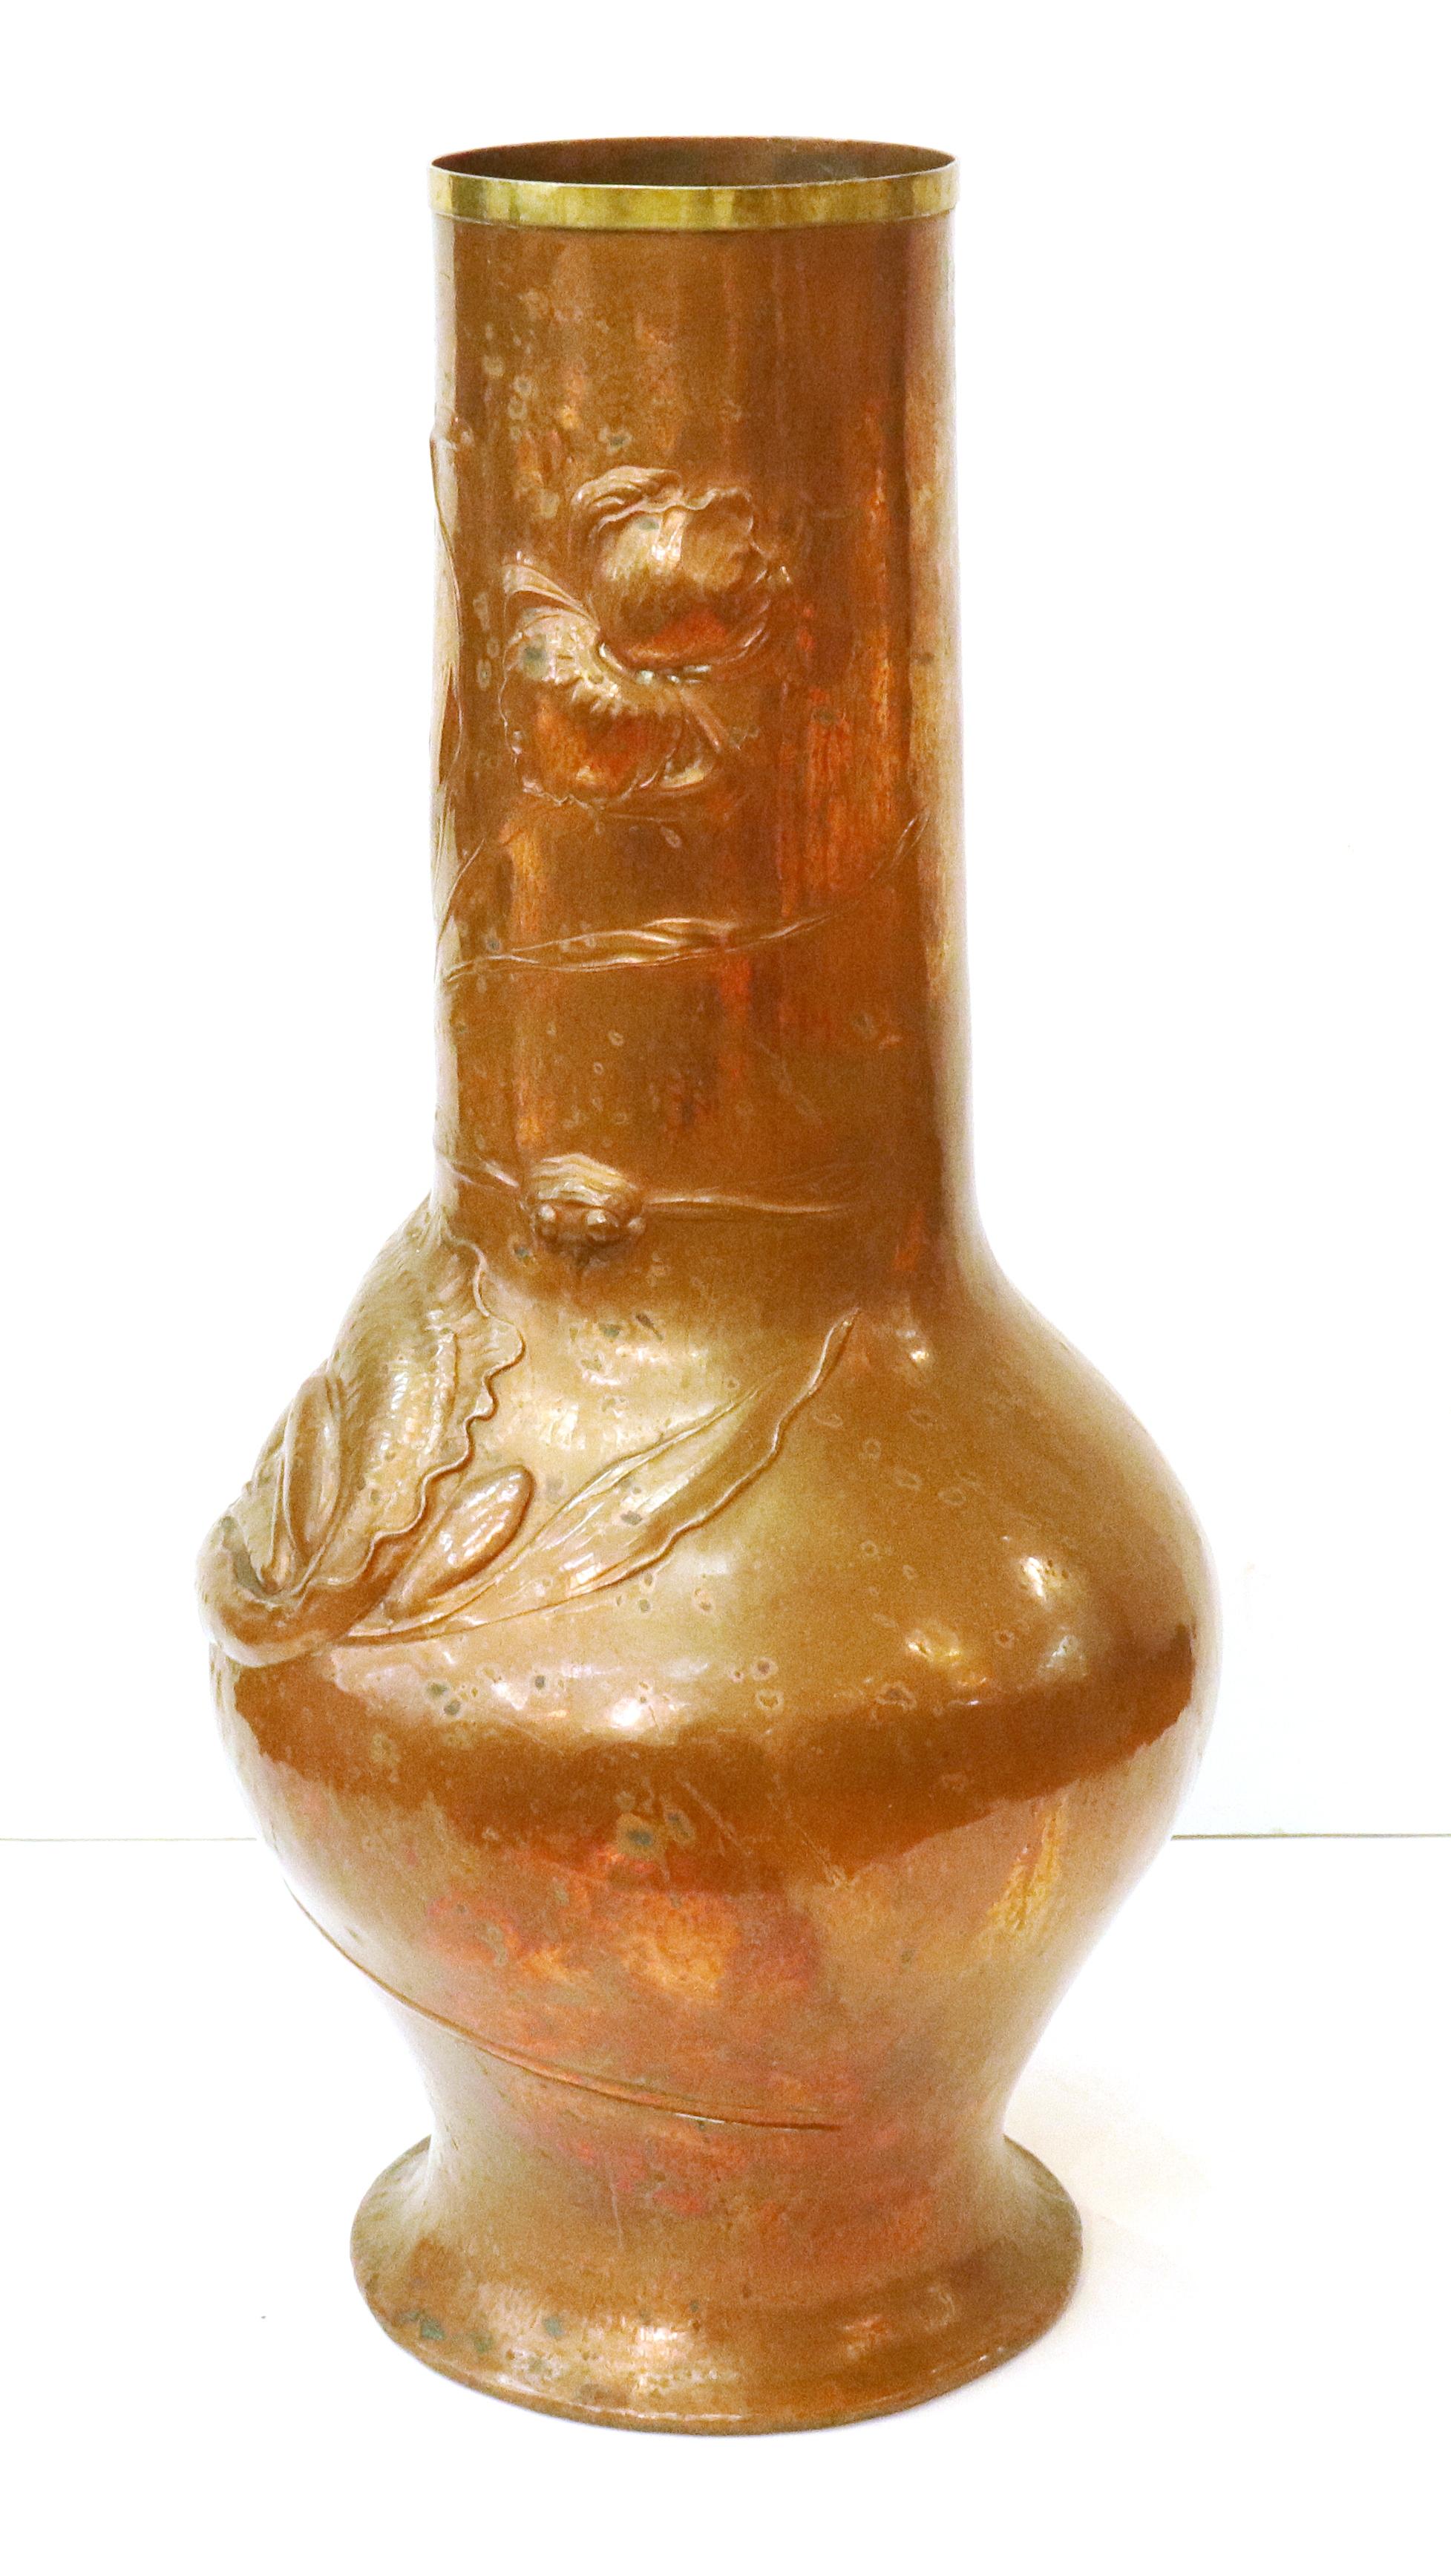 Ludwig Vierthaler German Jugendstil Lizard & Dragonfly Repousse Copper Vase In Good Condition For Sale In New York, NY